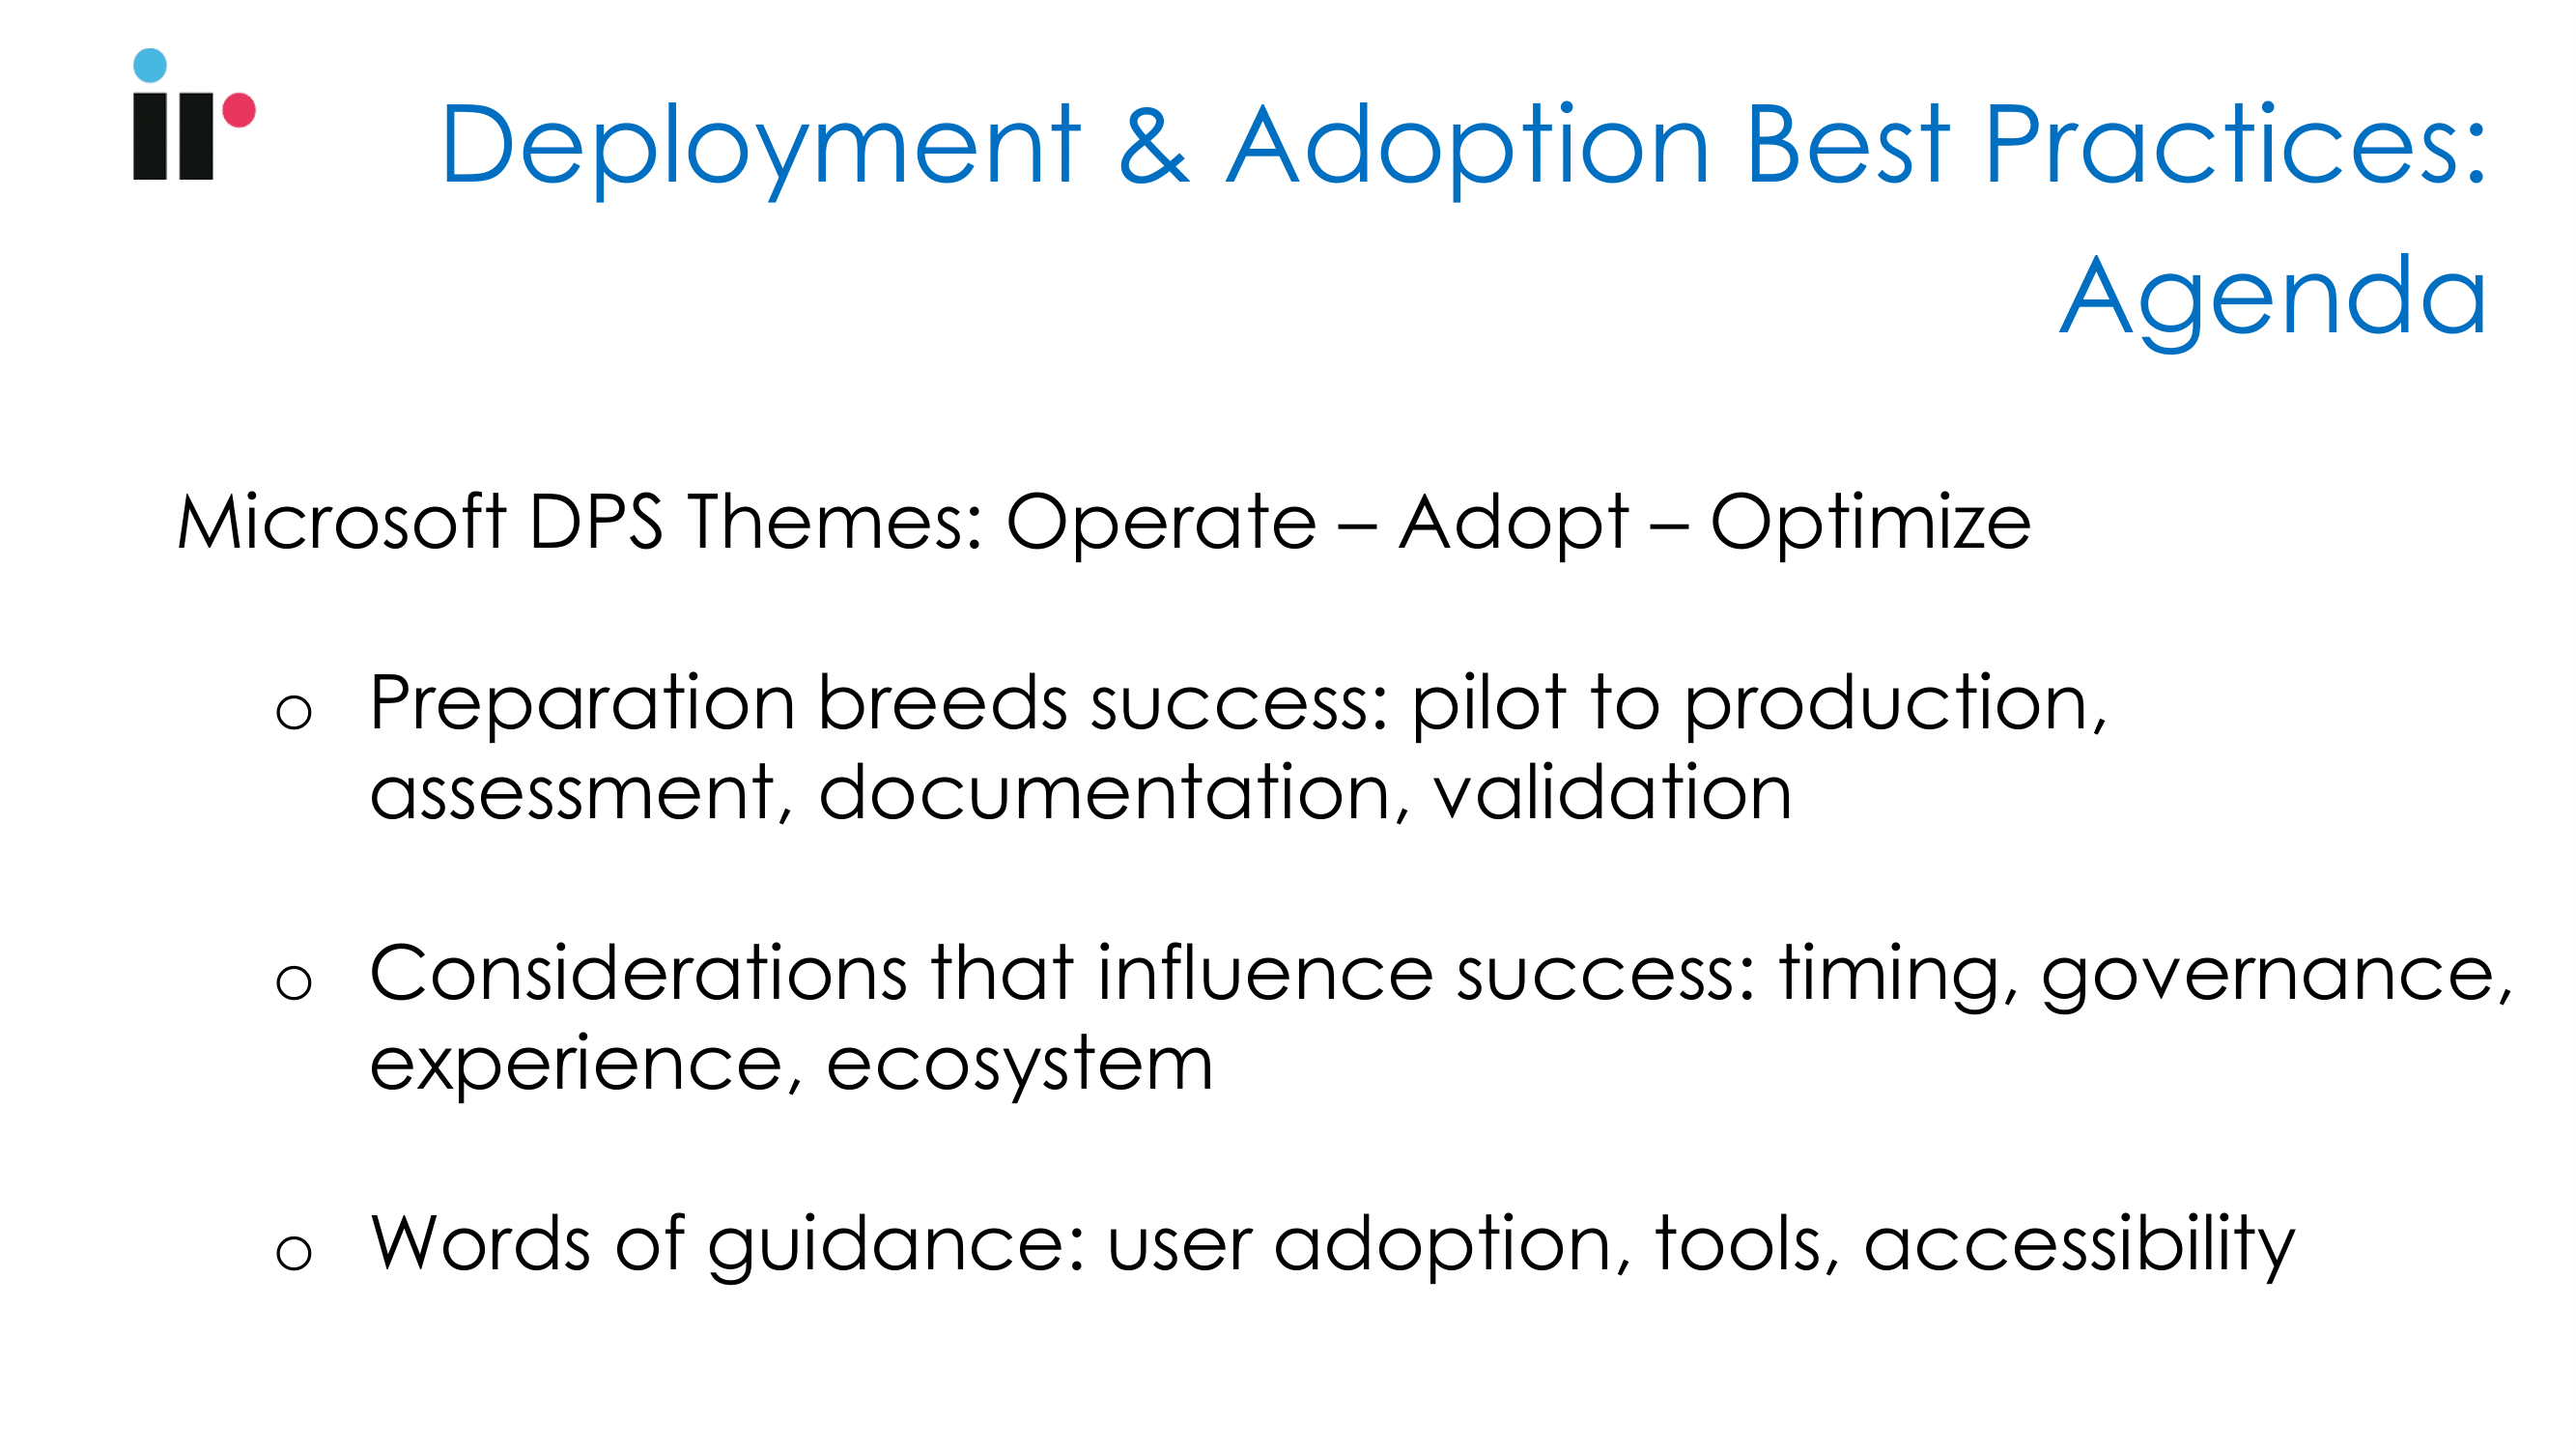 Best Practices of Deployment and Adoption